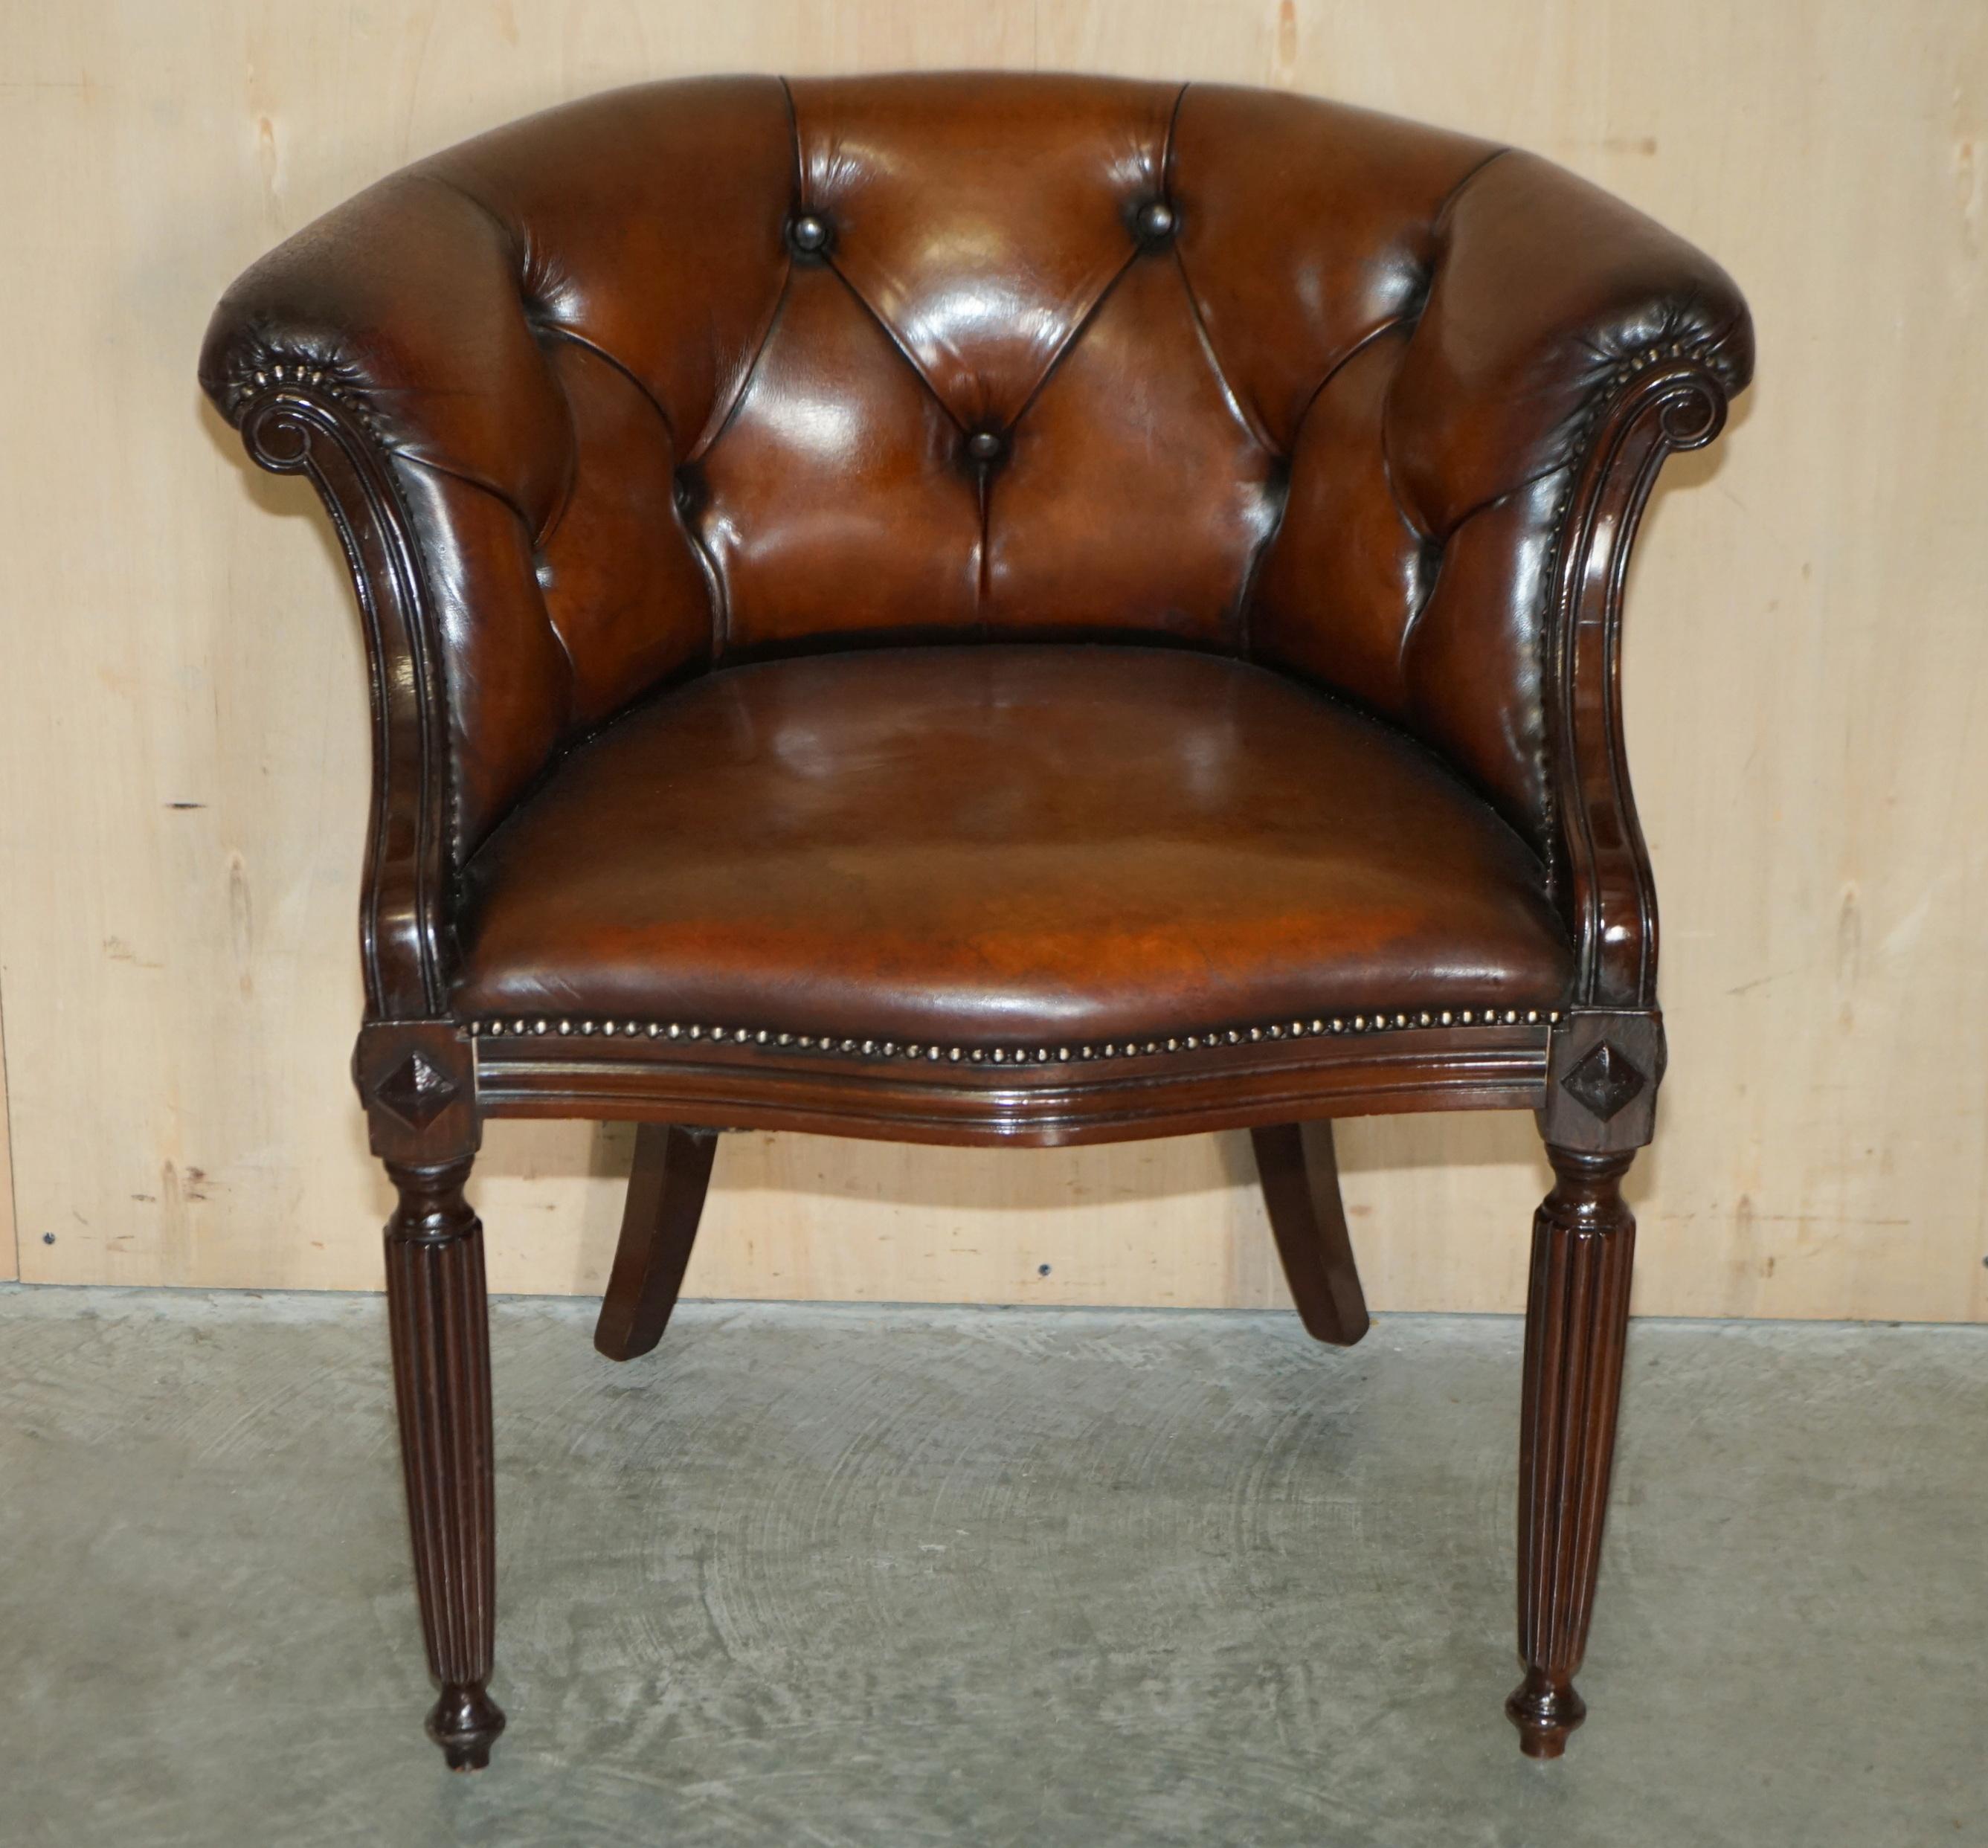 We are delighted to offer for sale this lovely fully restored hand dyed cigar brown leather Chesterfield tub armchair

A very good looking and comfortable armchair, I have some more which are going through the restoration process as we speak and